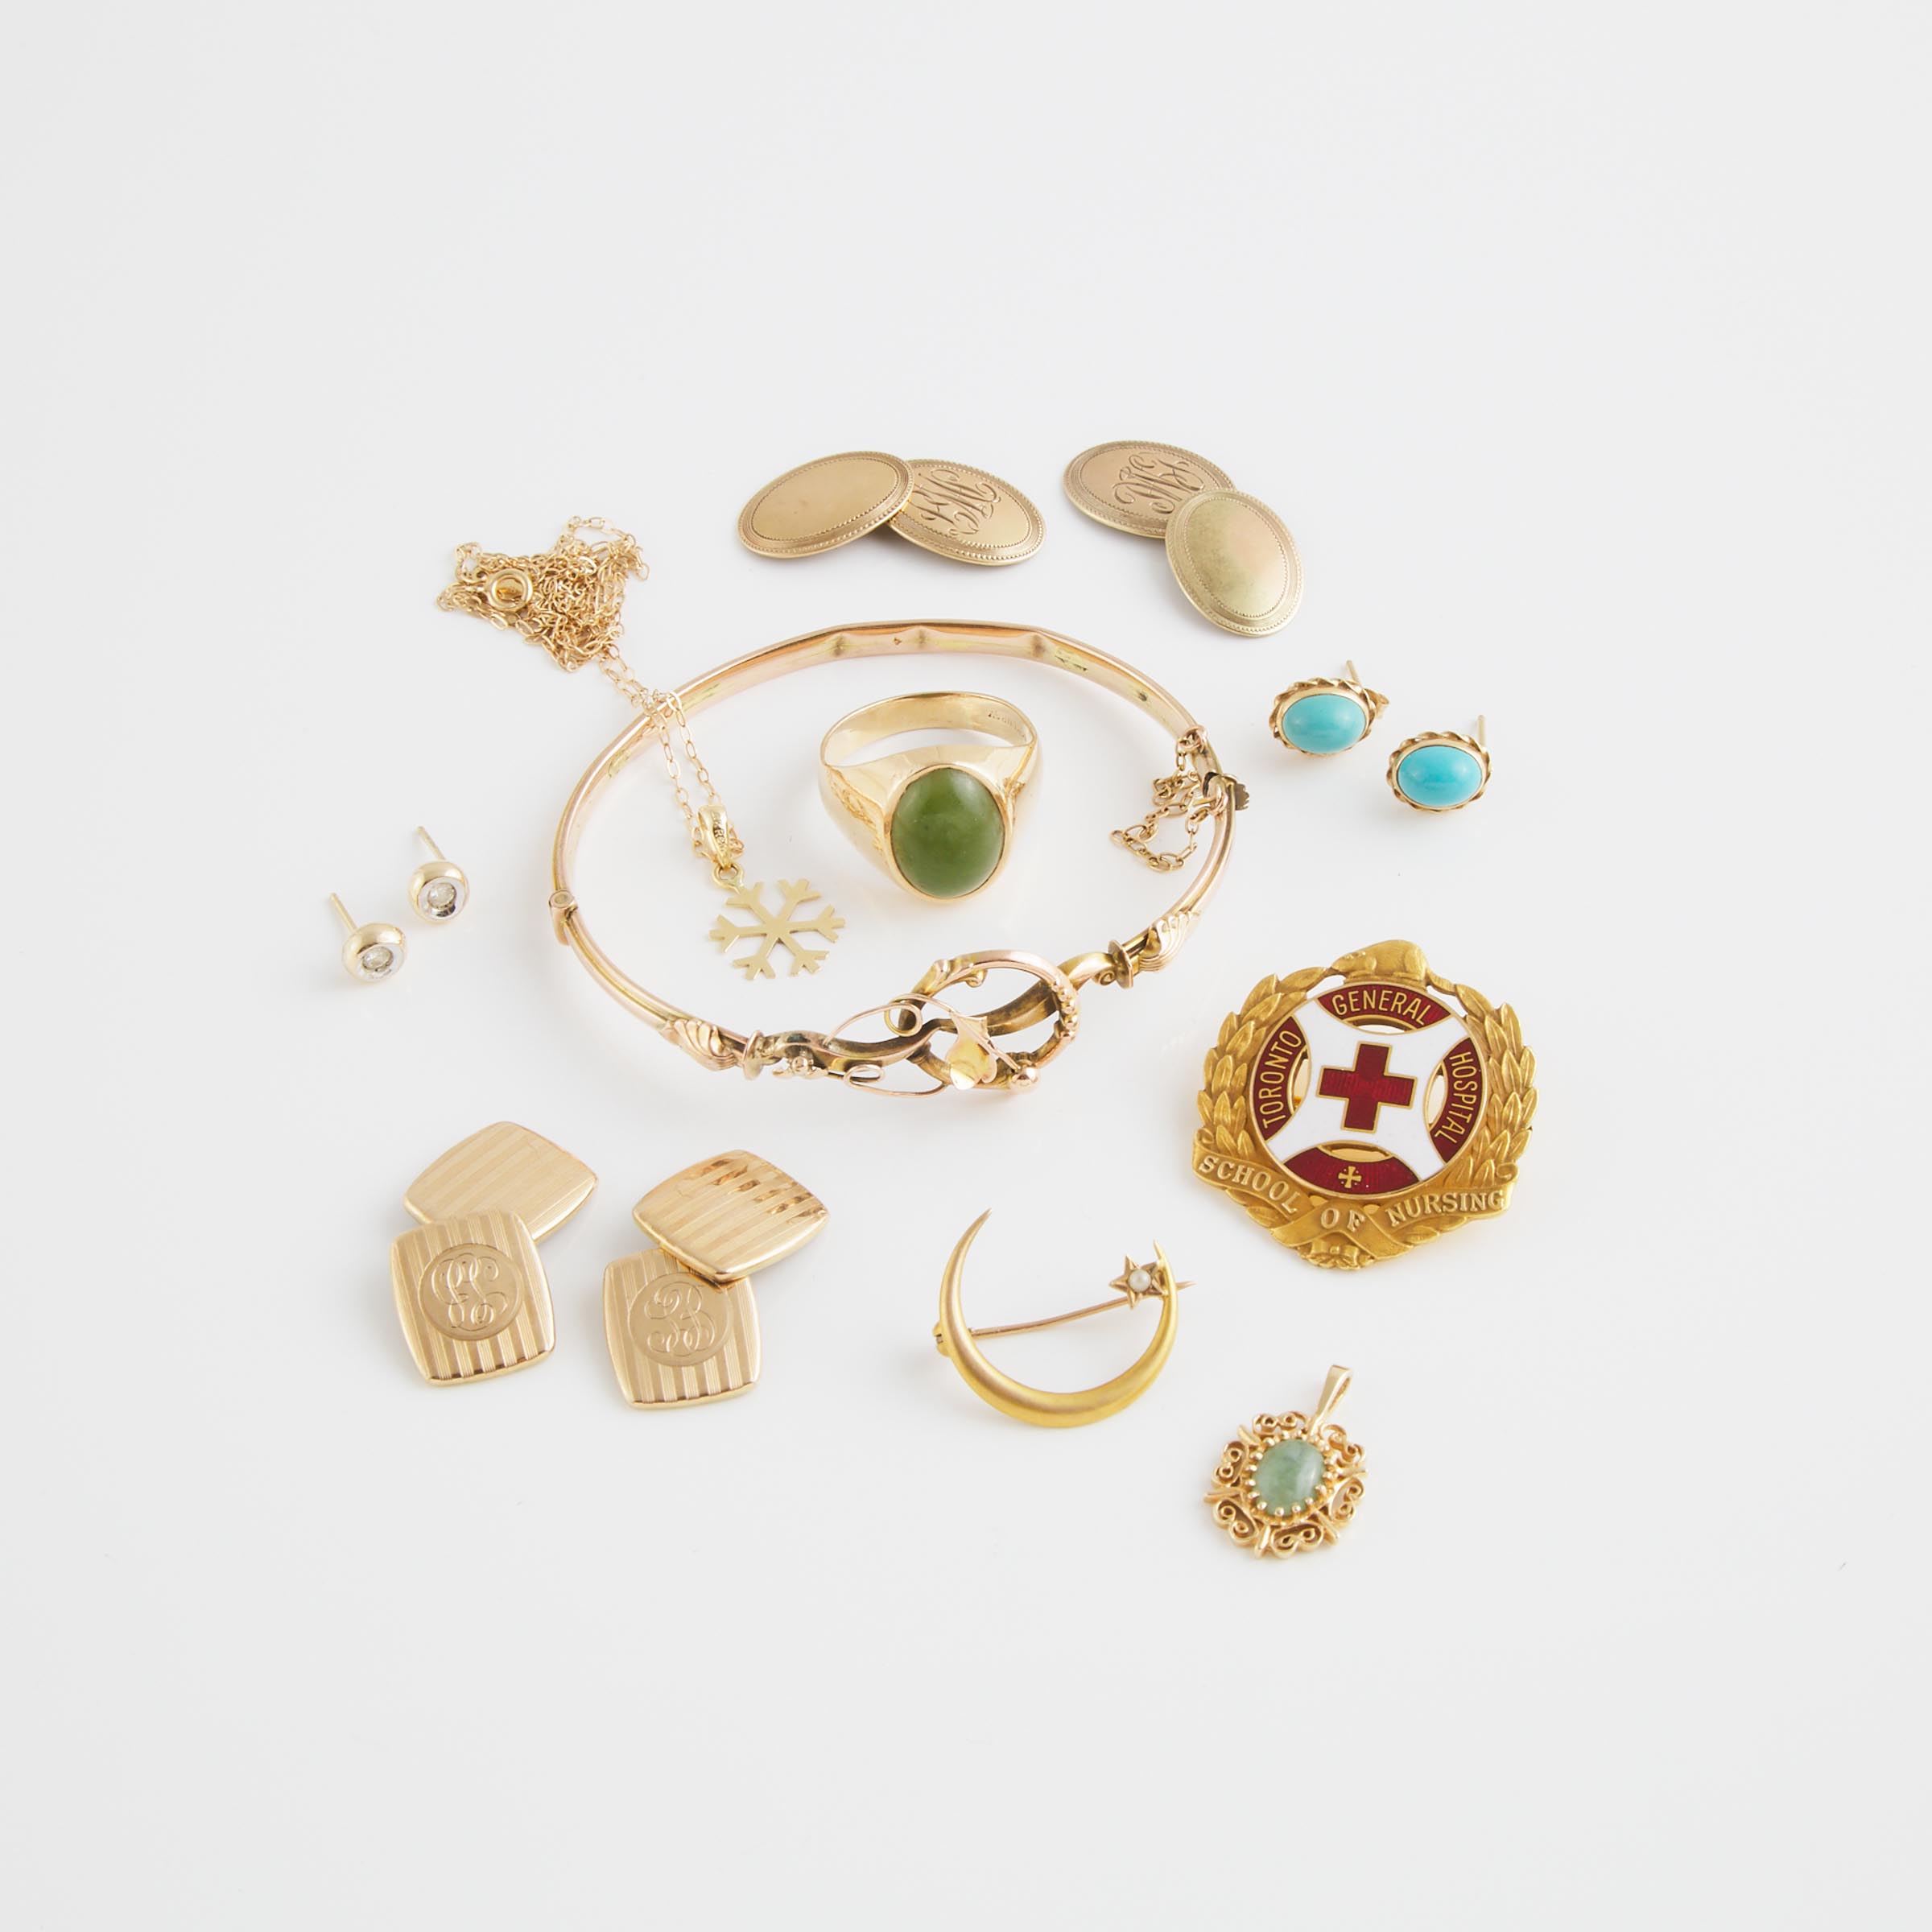 Small Group Of Gold Jewellery